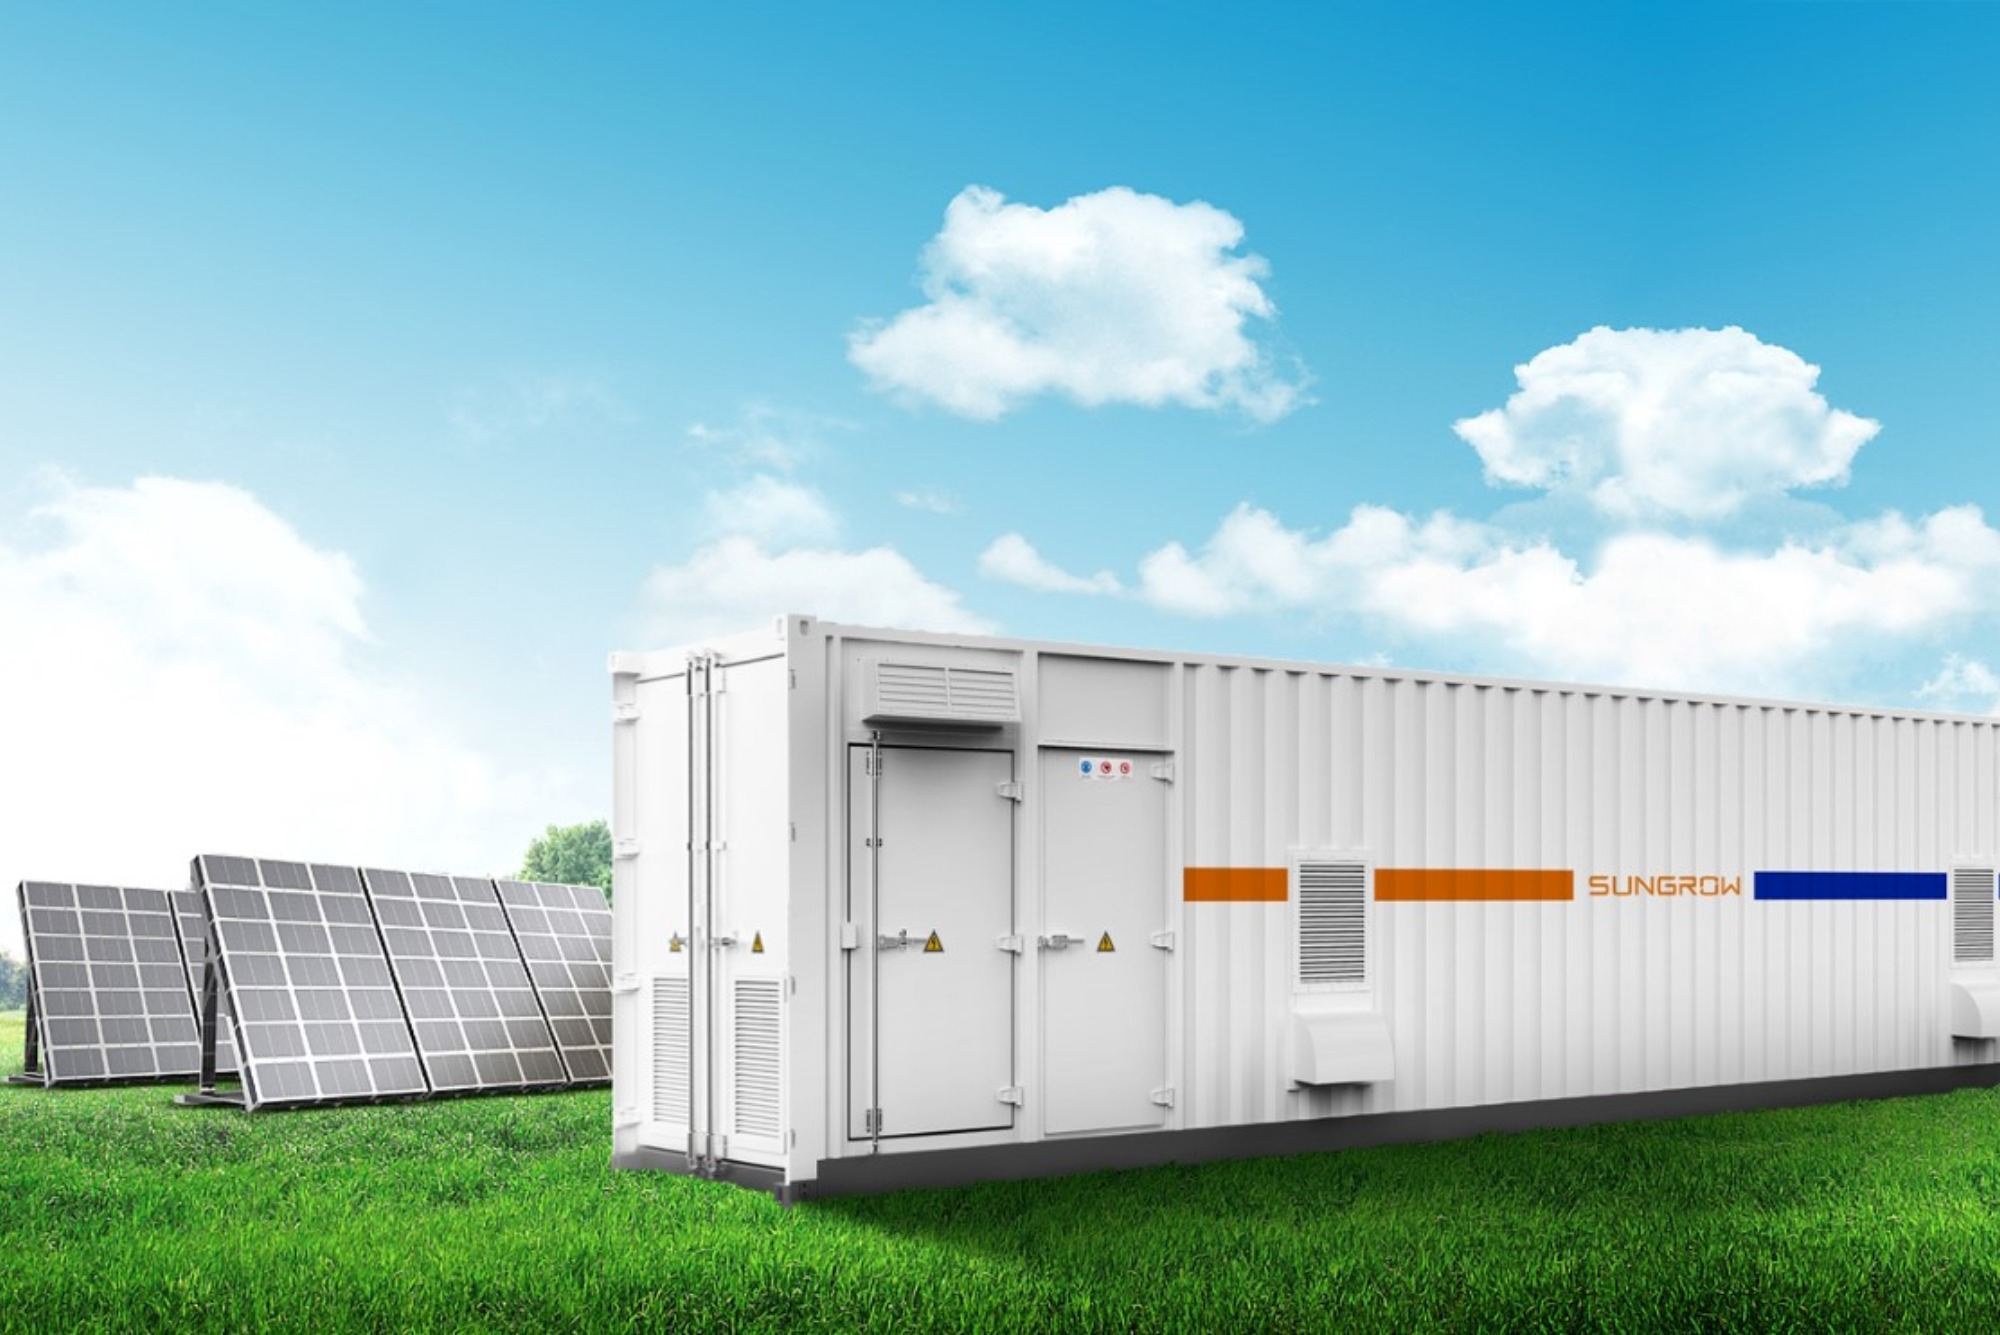 Sungrow Residential Storage System Harnessing the Power of High Voltage LFP Battery